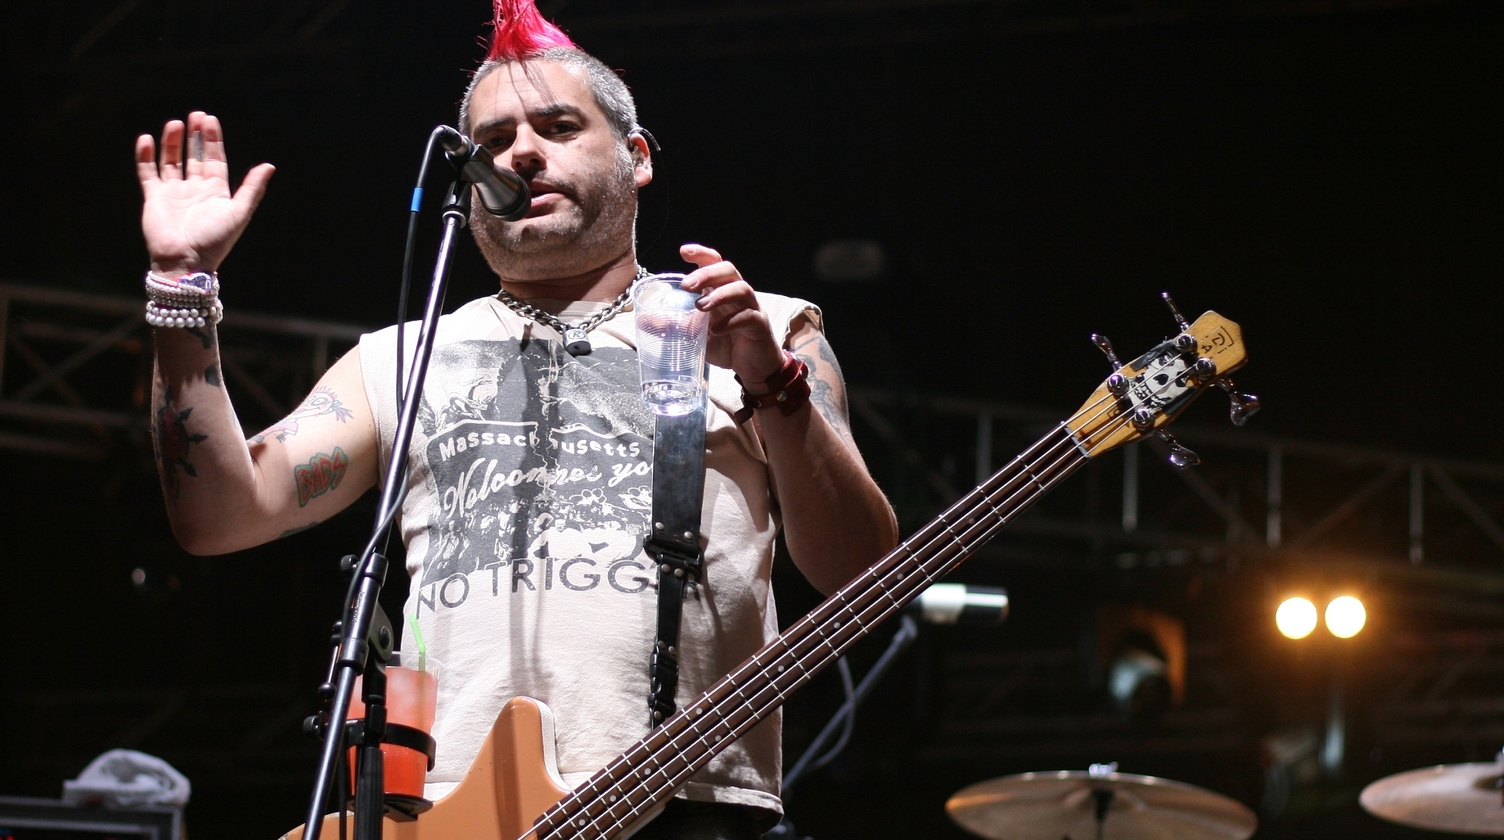 Fat Mike's Blue Hair: A Punk Rock Icon's Signature Look - wide 9